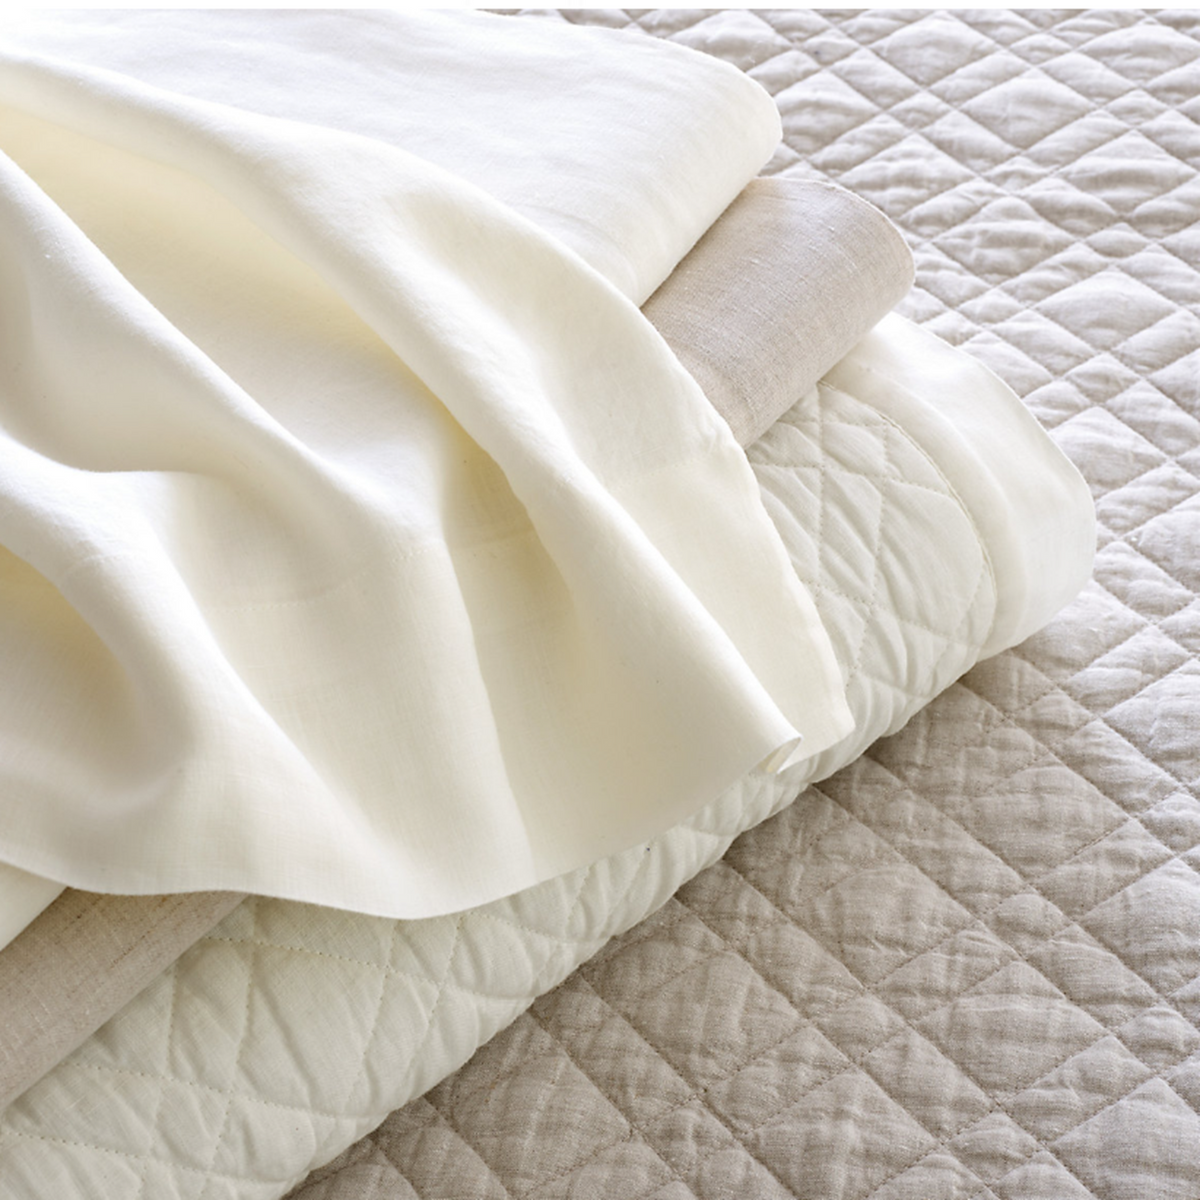 Detail Image ofPine Cone Hill Washed Linen Quilted Bedding in Color Ivory and Natural